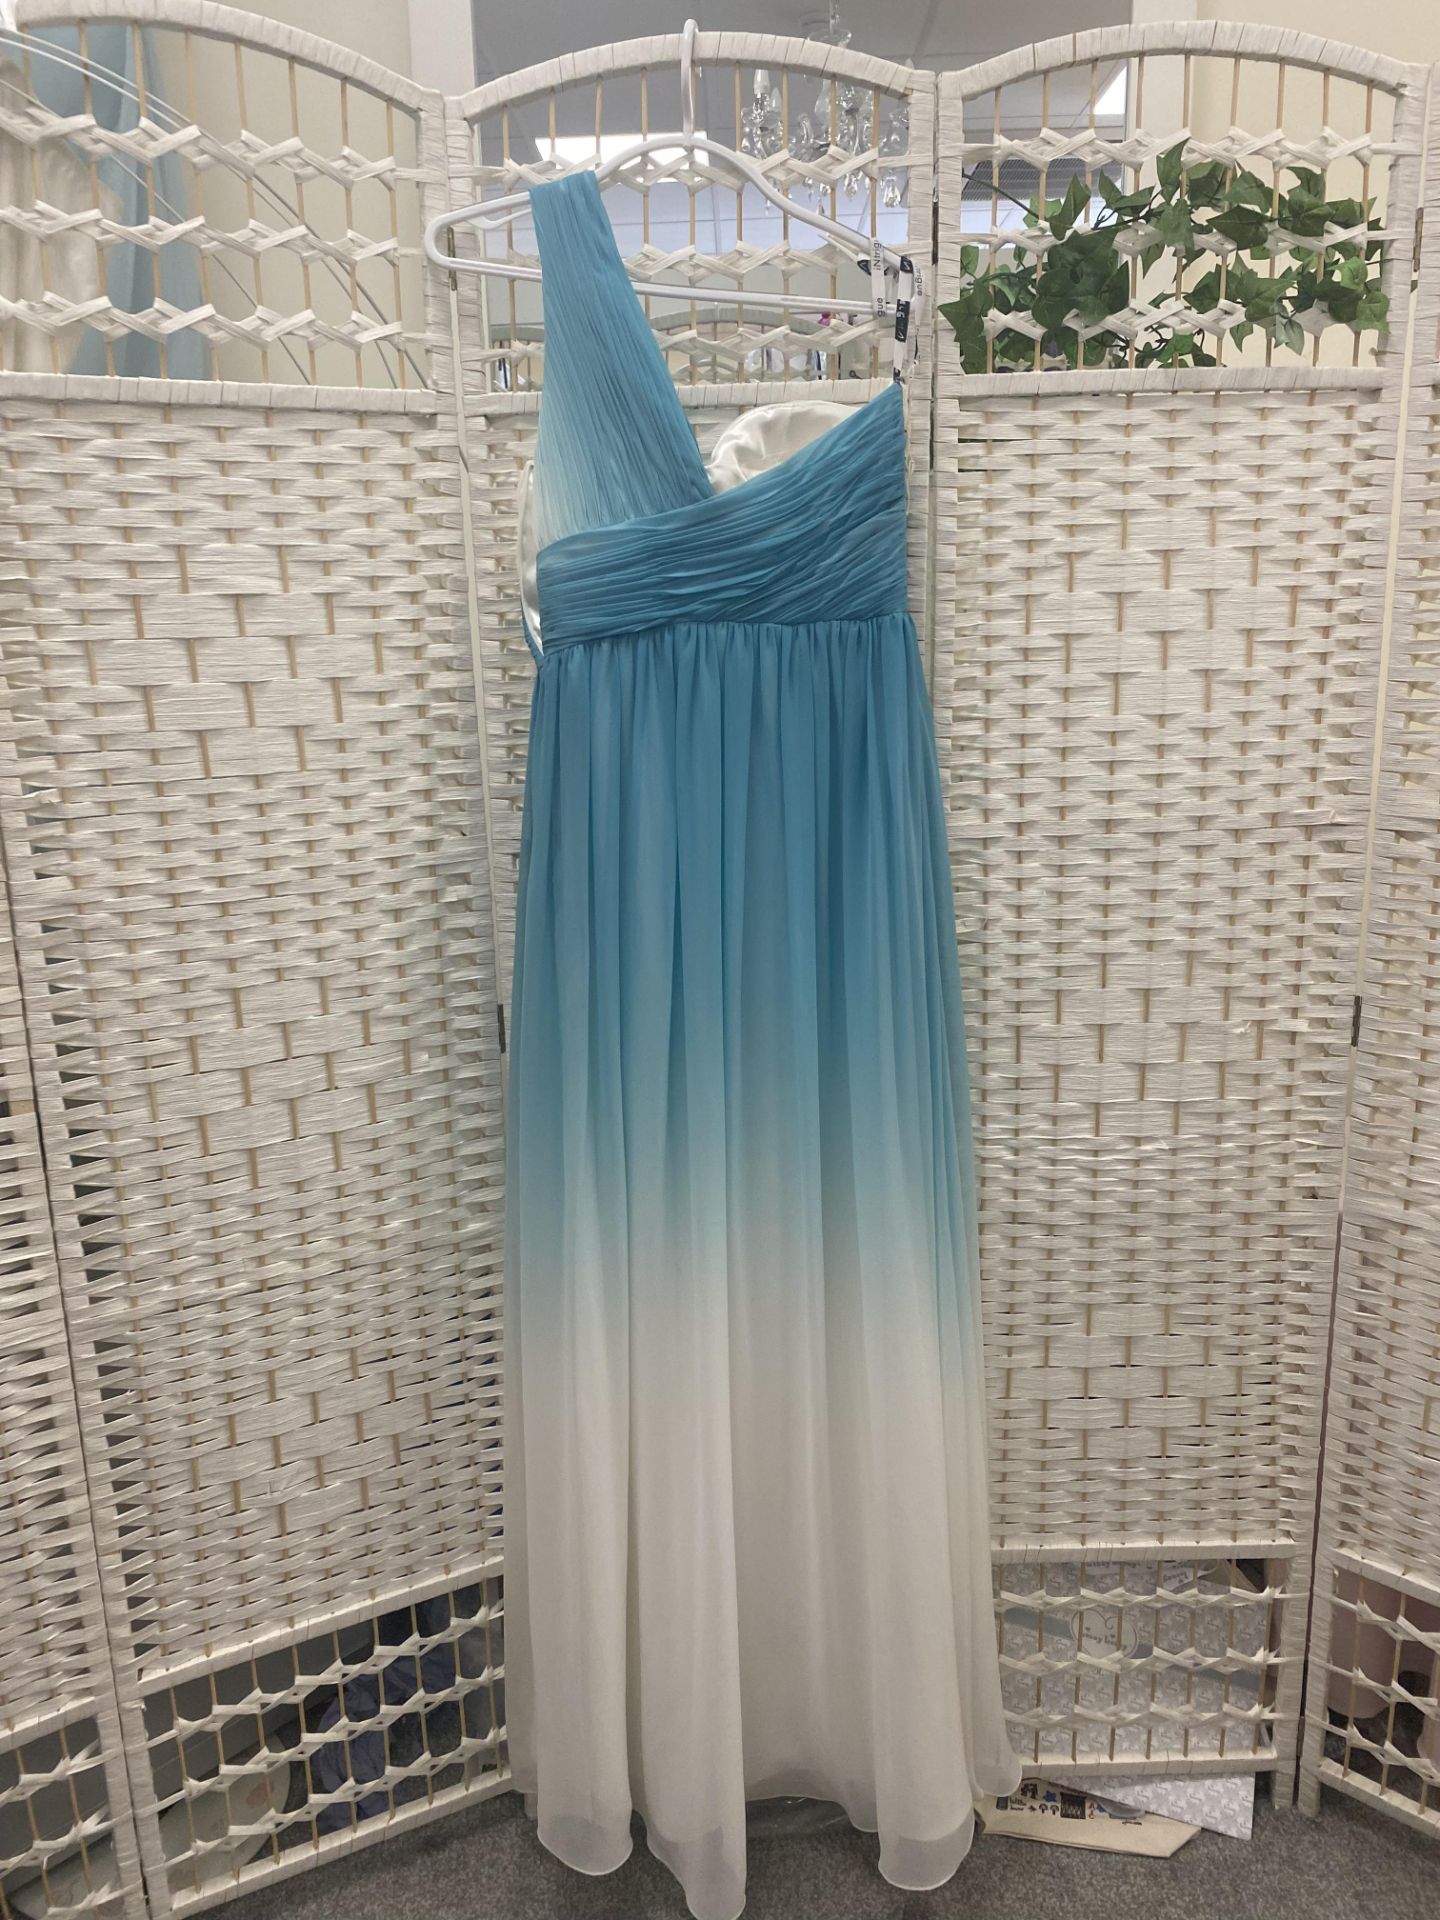 Alexia Designs Blue and White Ombre Prom Dress Size 6 - Image 3 of 7